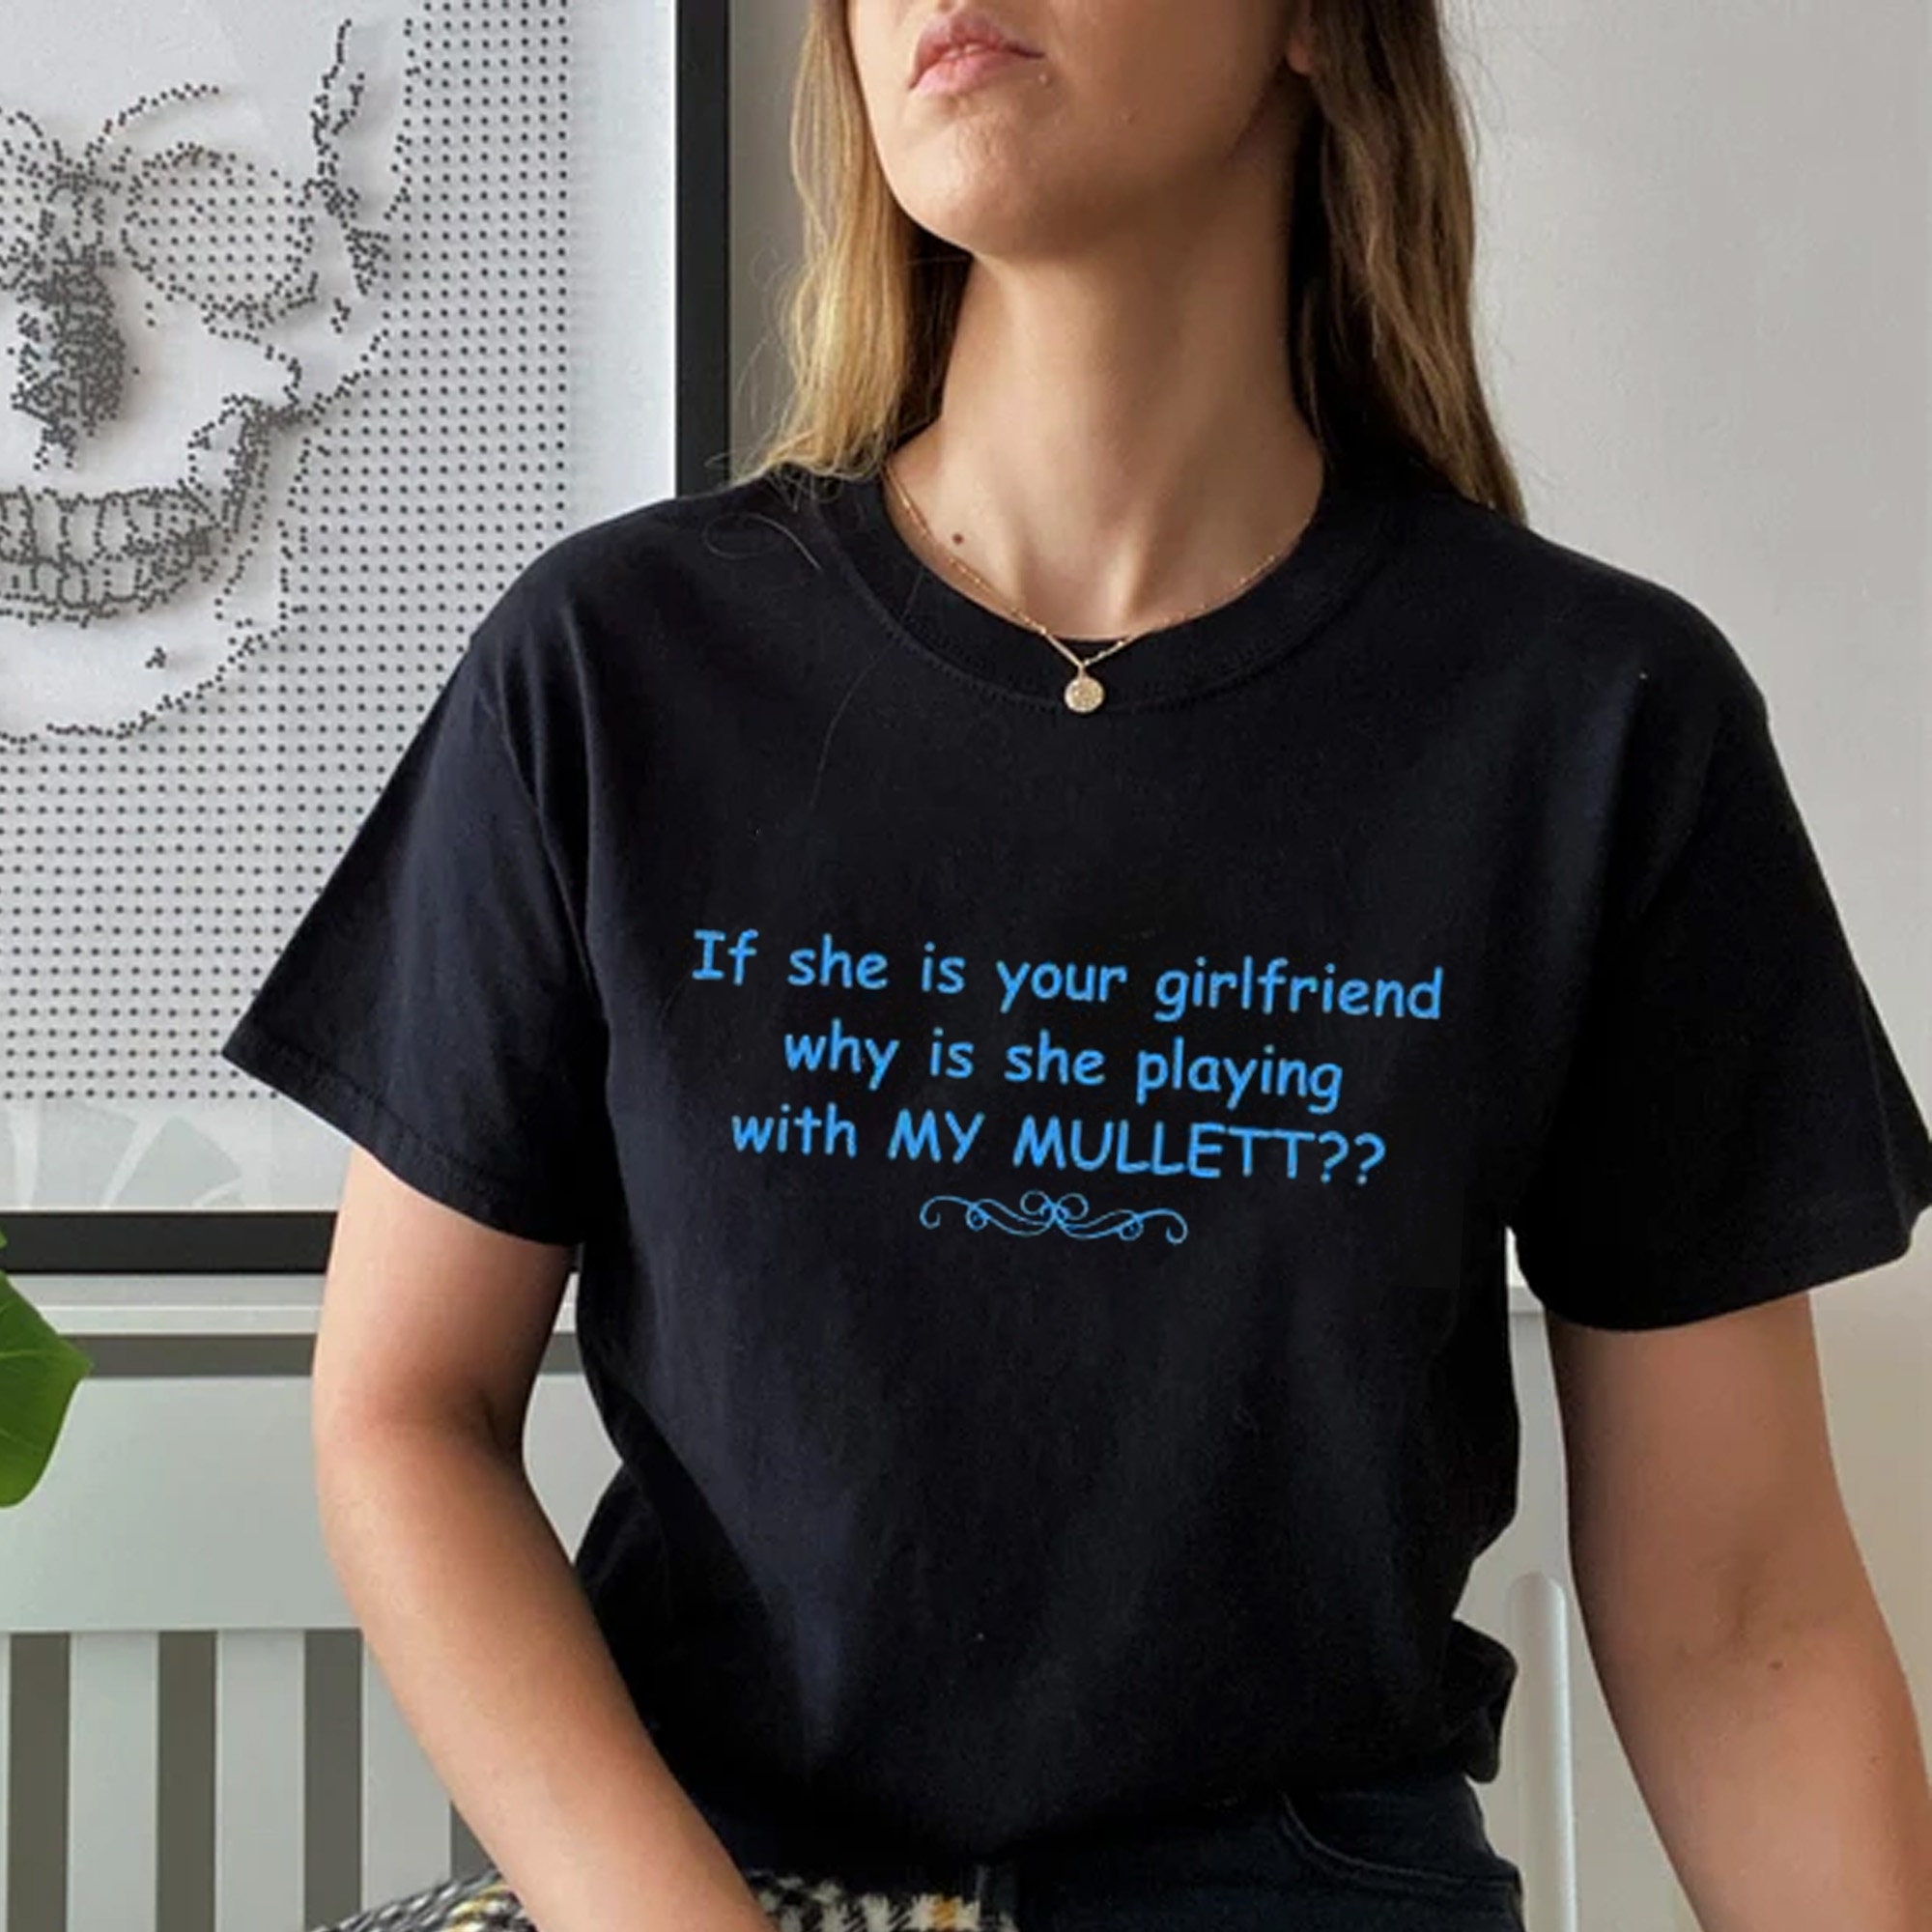 Discover My mullett Shirt, If she is your girlfriend why is she playing with My Mullett Shirt